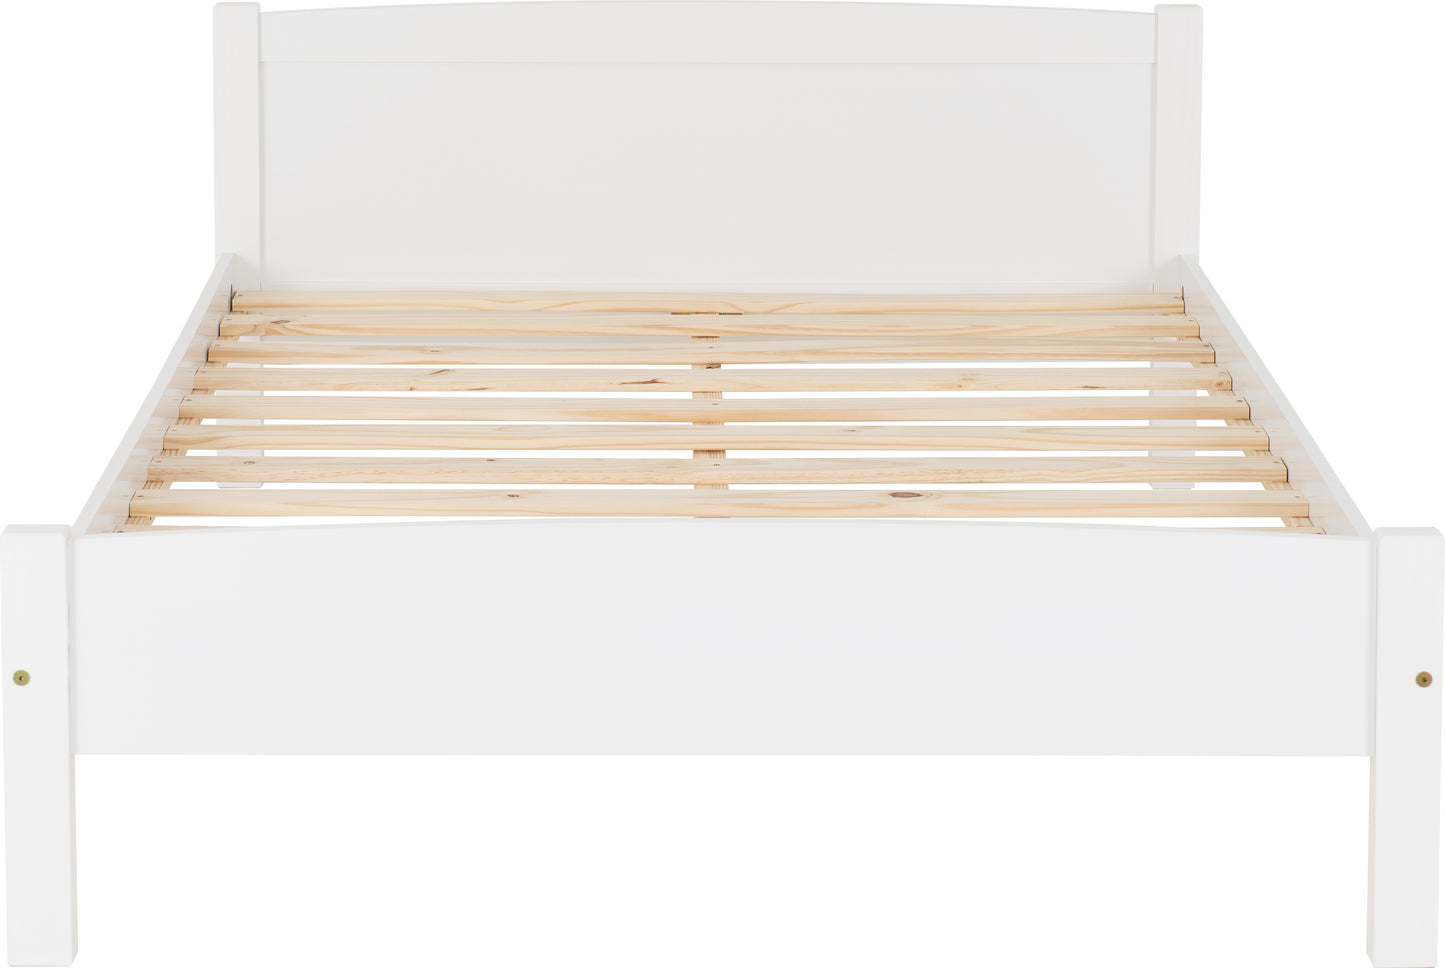 AMBER 4'6" BED - WHITE